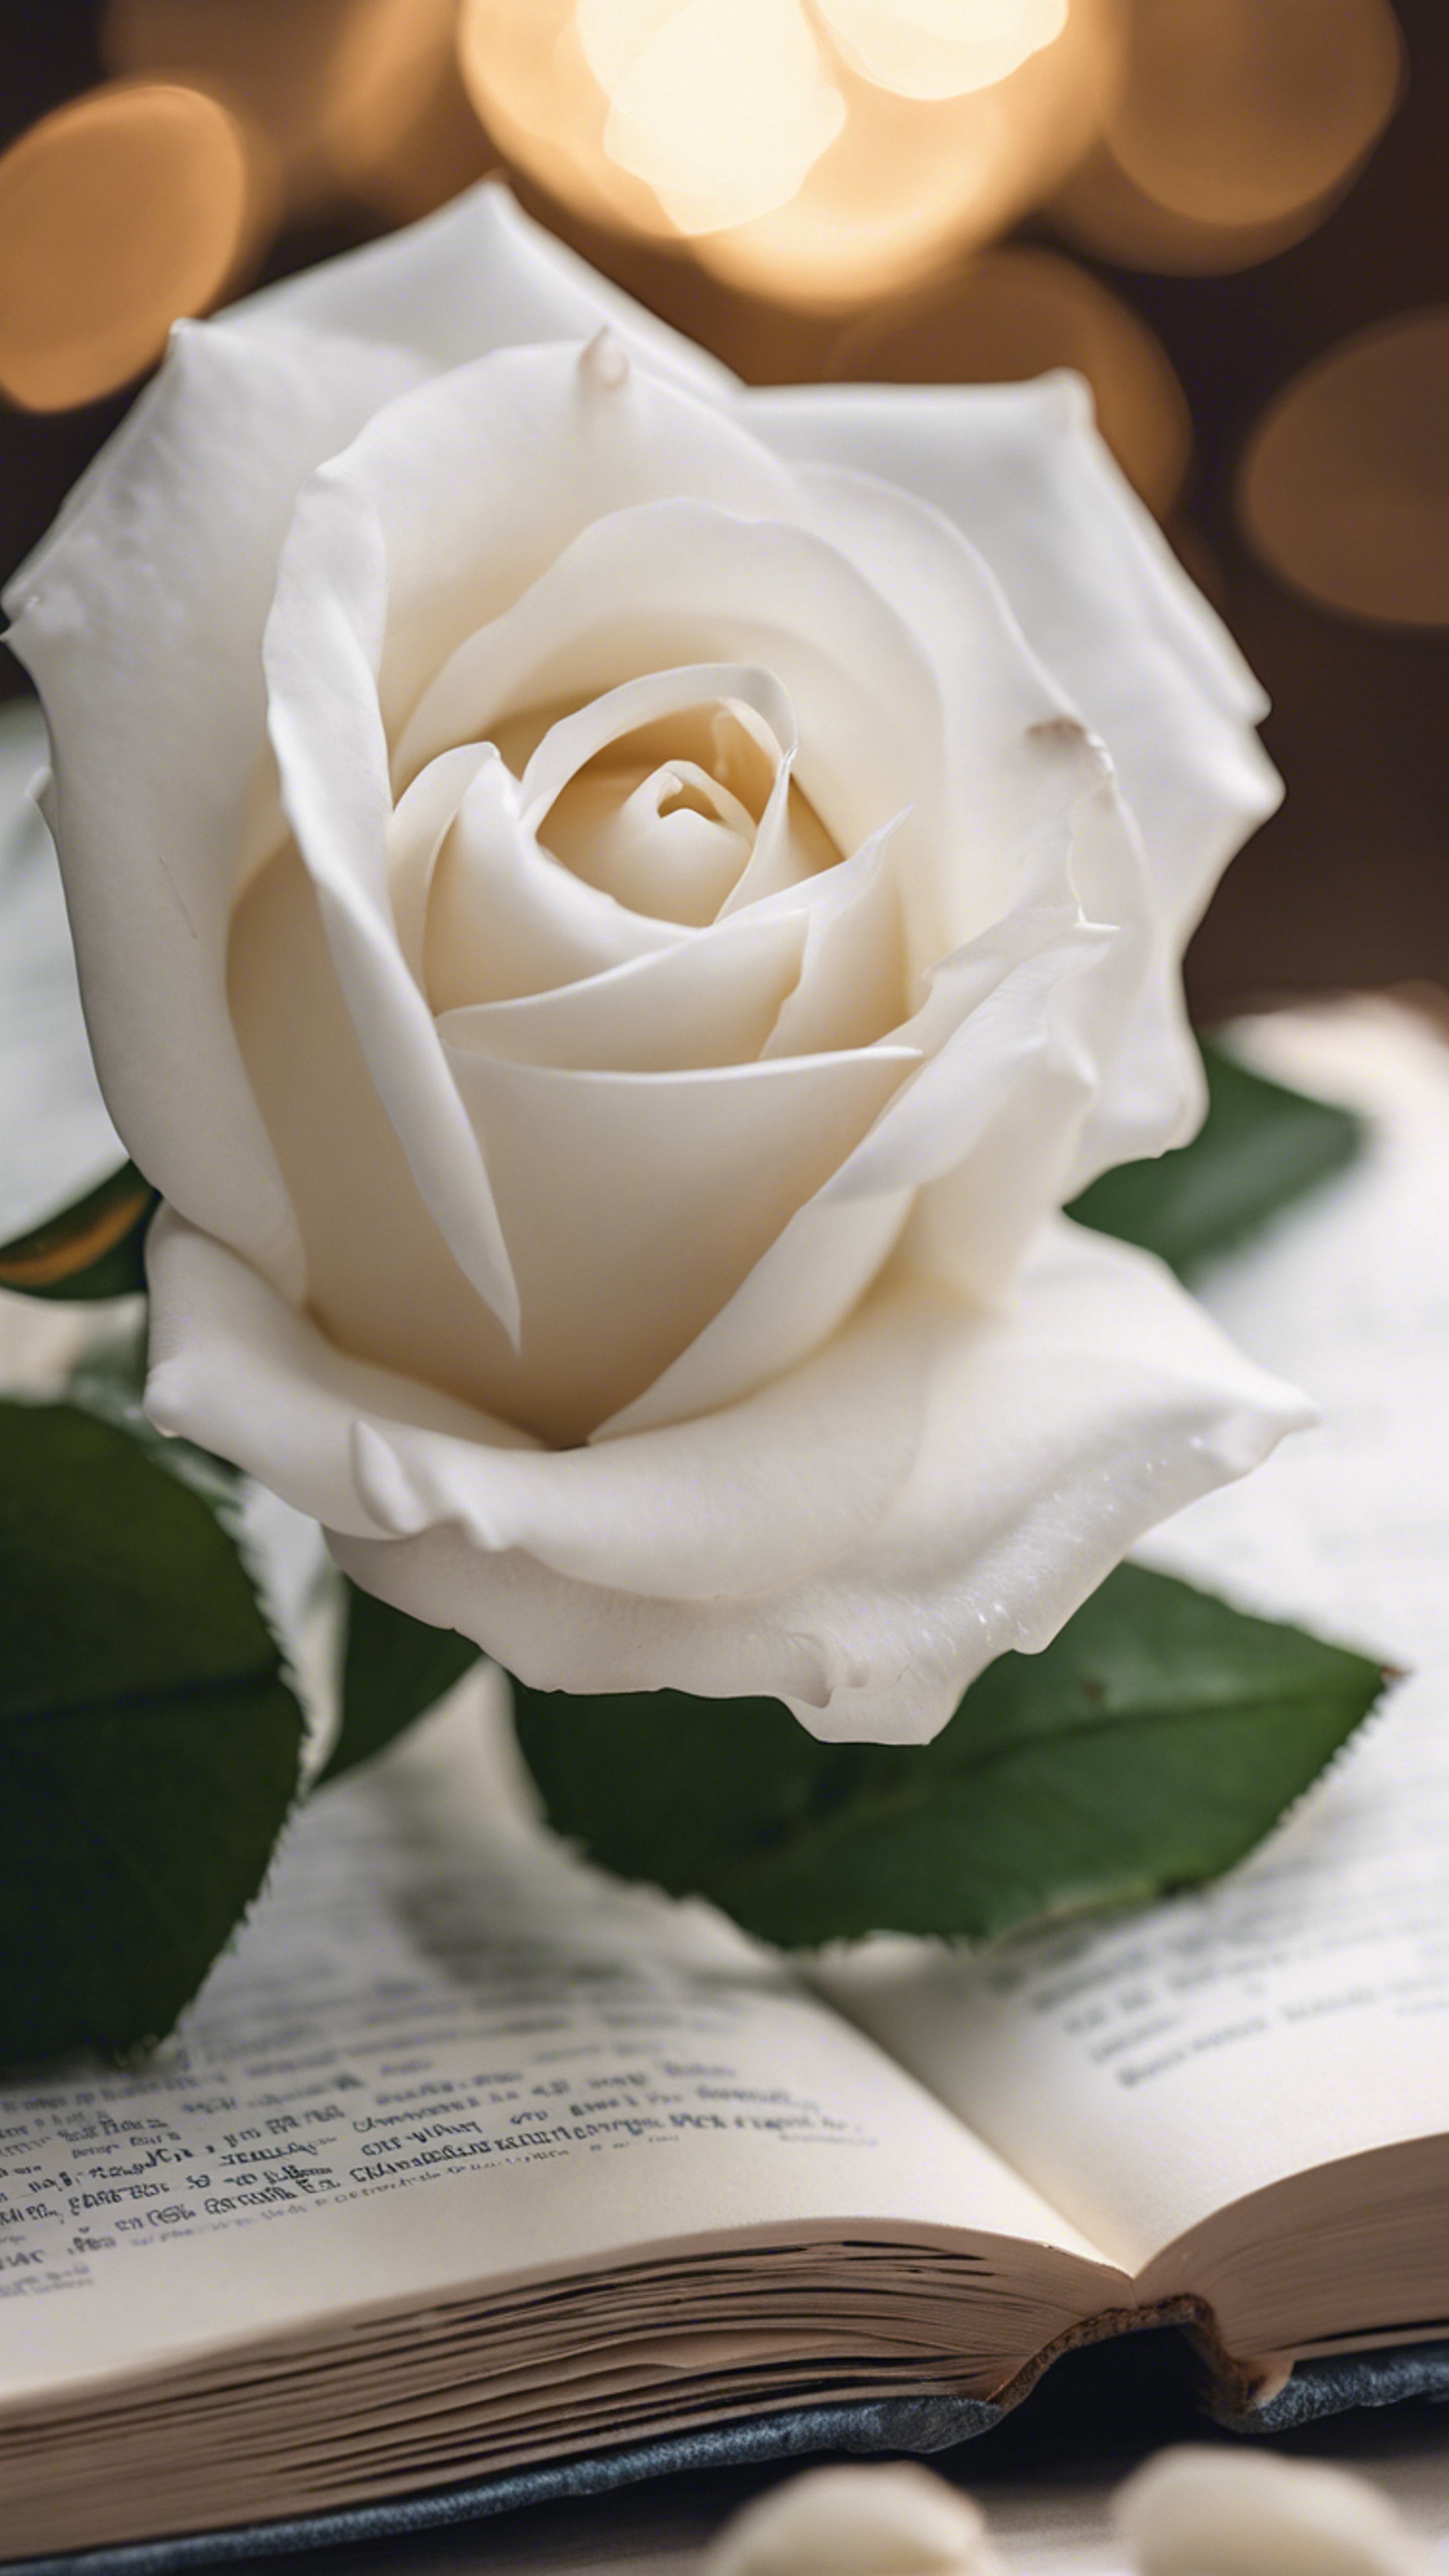 A serene white rose perched on an open hardcover book.壁紙[5eeaaa5d95634df1b3fb]